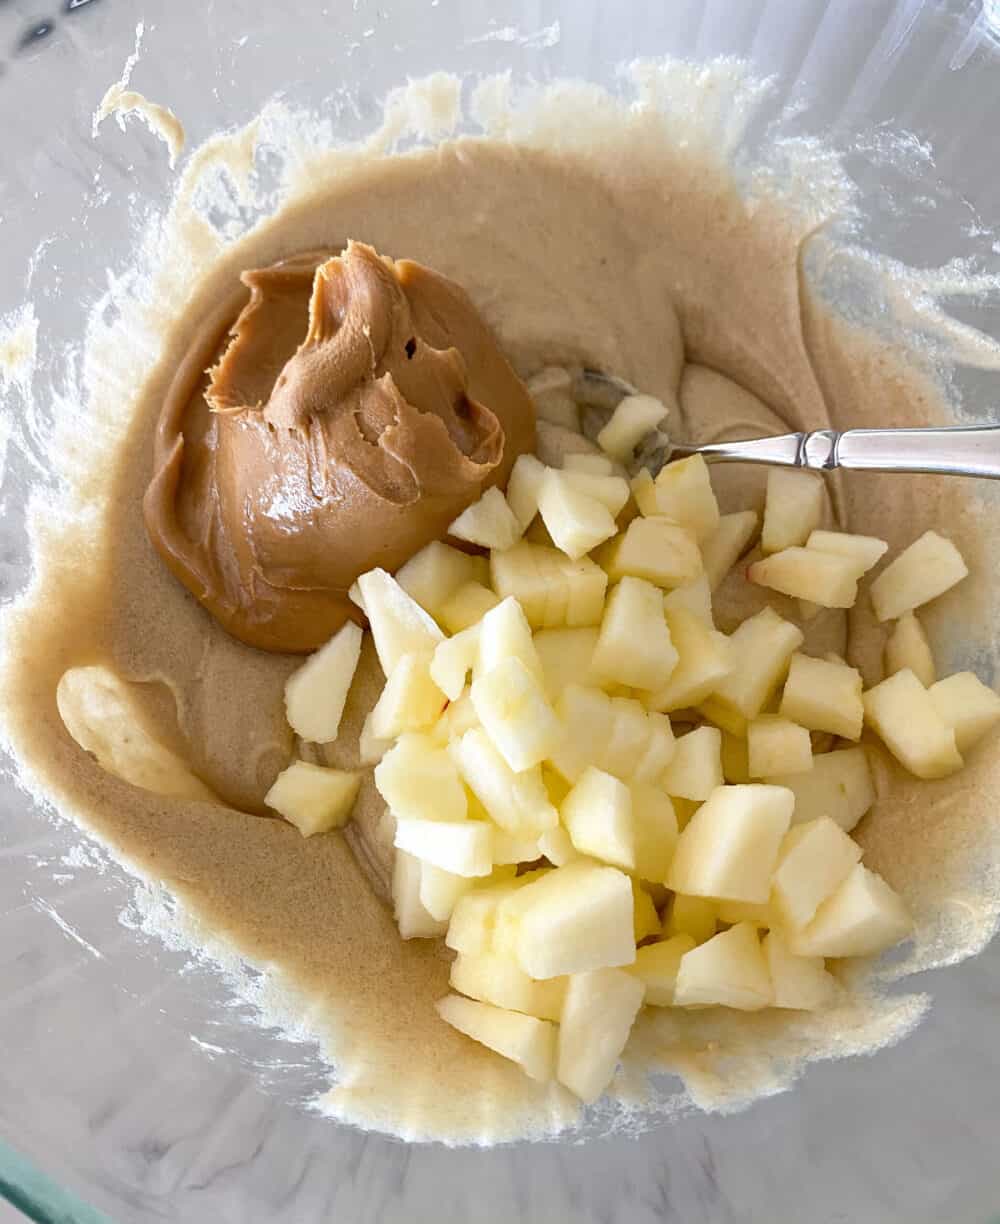 Apples and Peanut Butter Being Added to the Batter